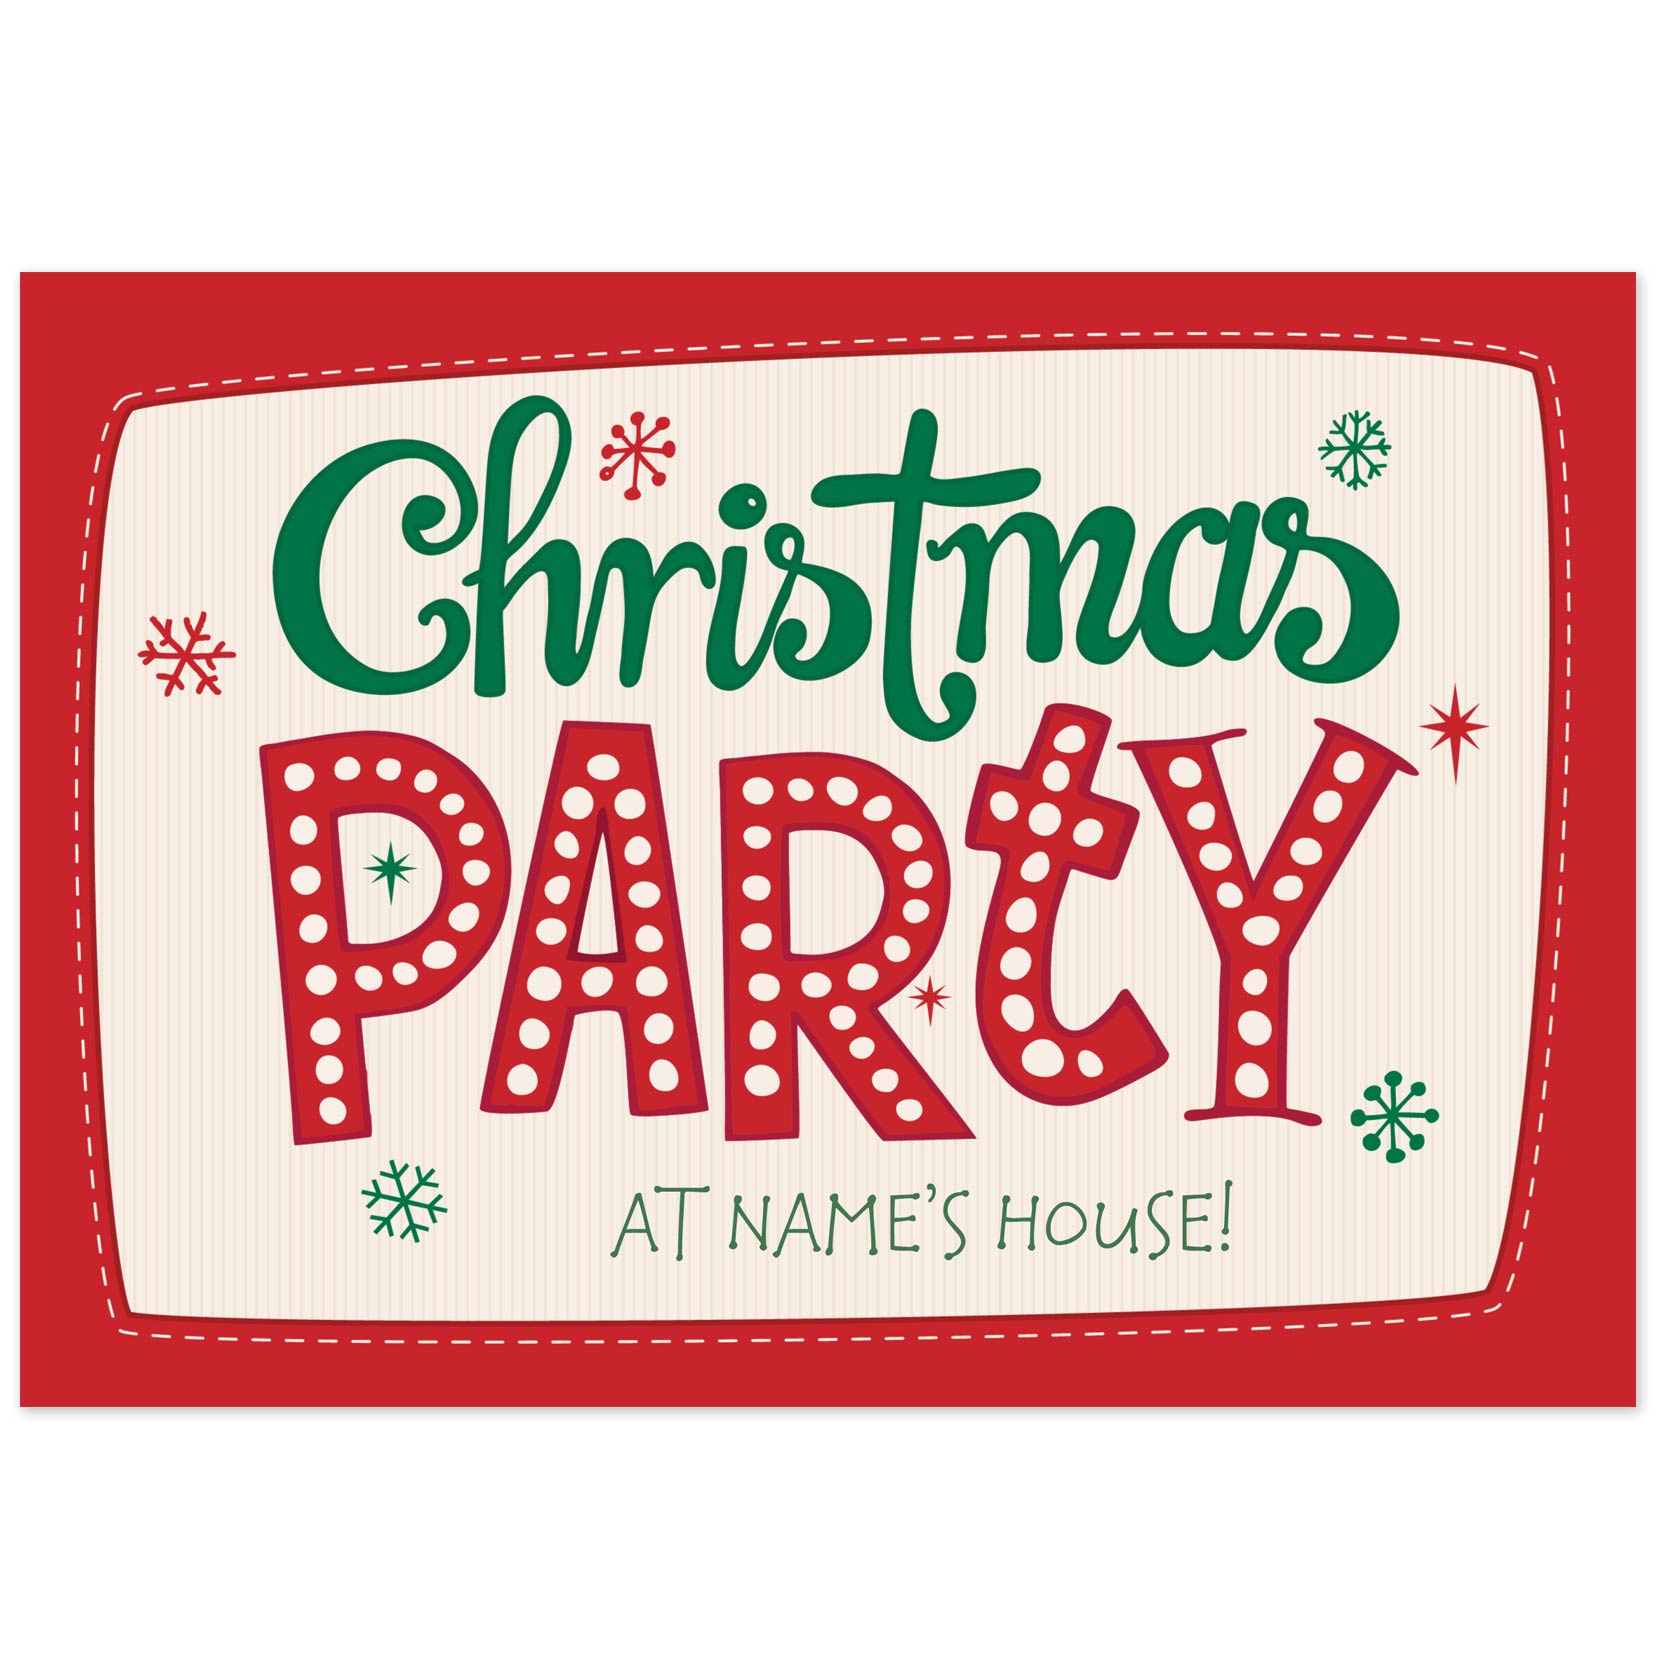 holiday entertaining clipart